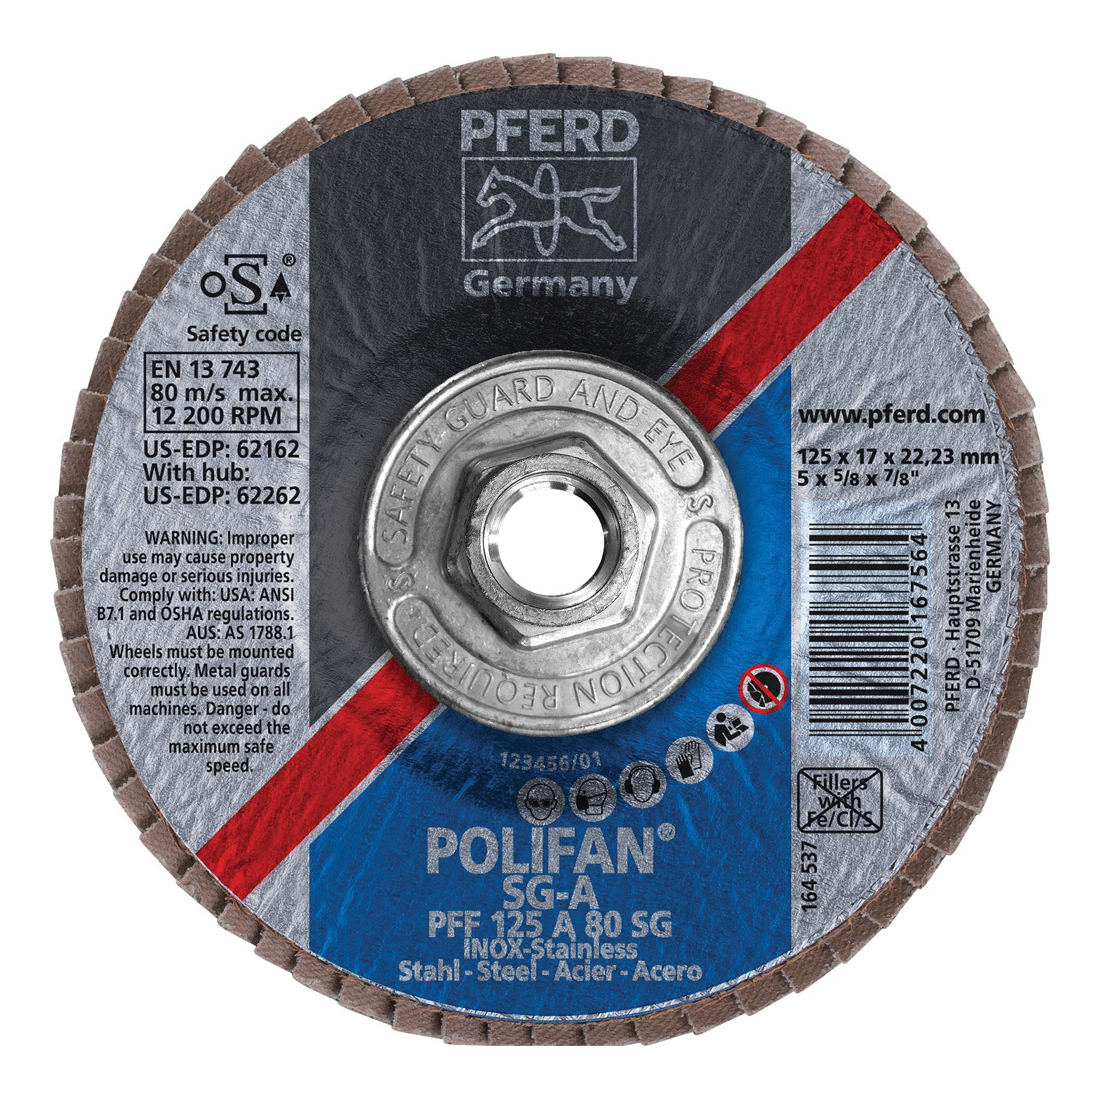 PFERD Polifan® 62262 Performance Line SG A Threaded Coated Abrasive Flap Disc, 5 in Dia, 80 Grit, Aluminum Oxide Abrasive, Type 27 Flat Disc